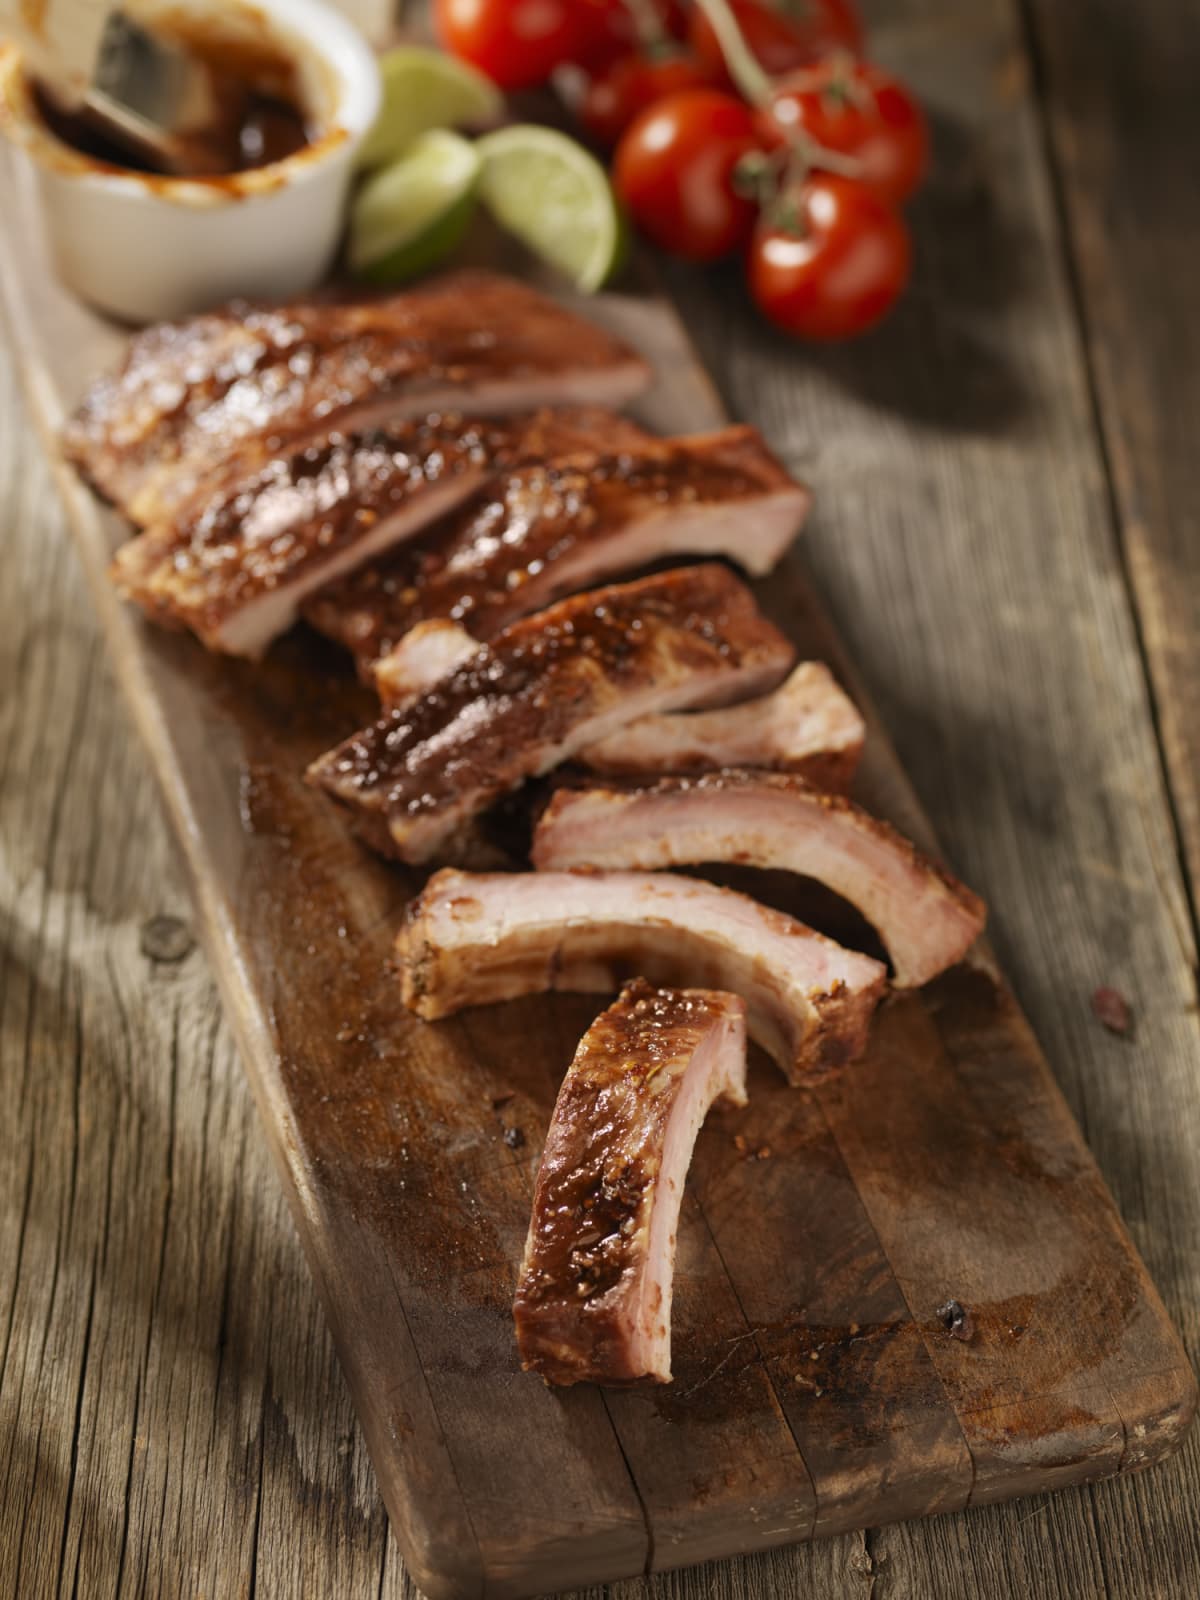 Slices of cooked pork on cutting board